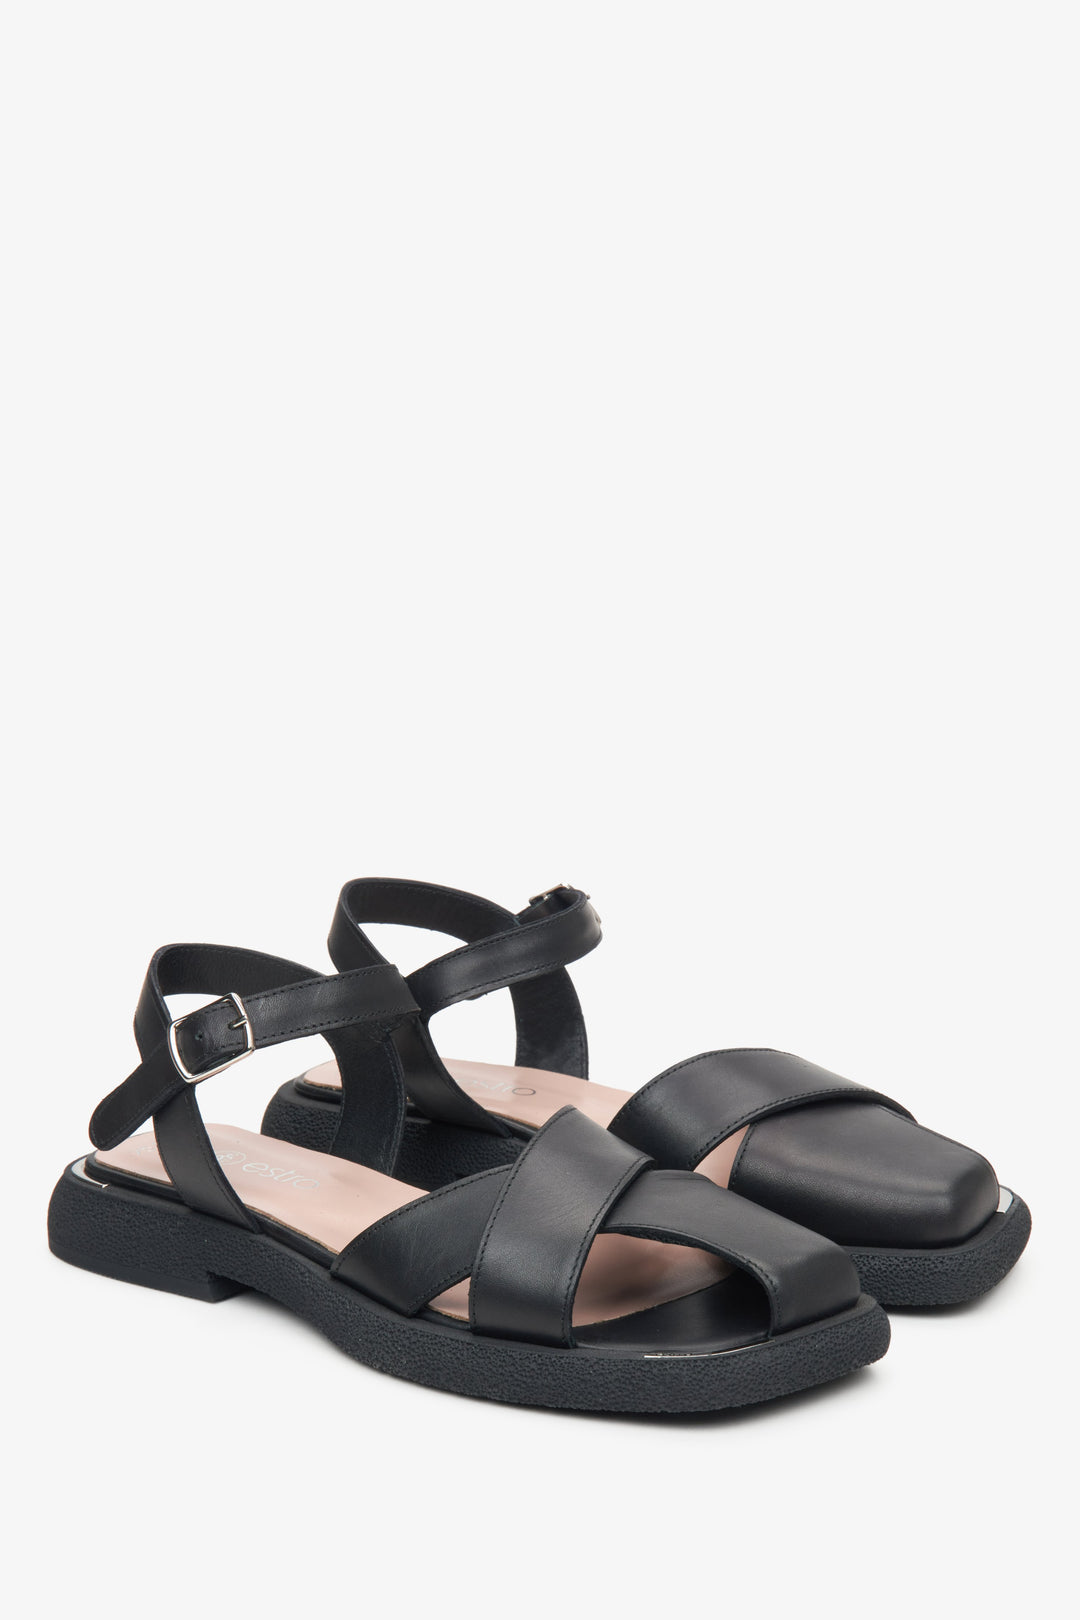 Black leather sandals with criss-cross straps by Estro.